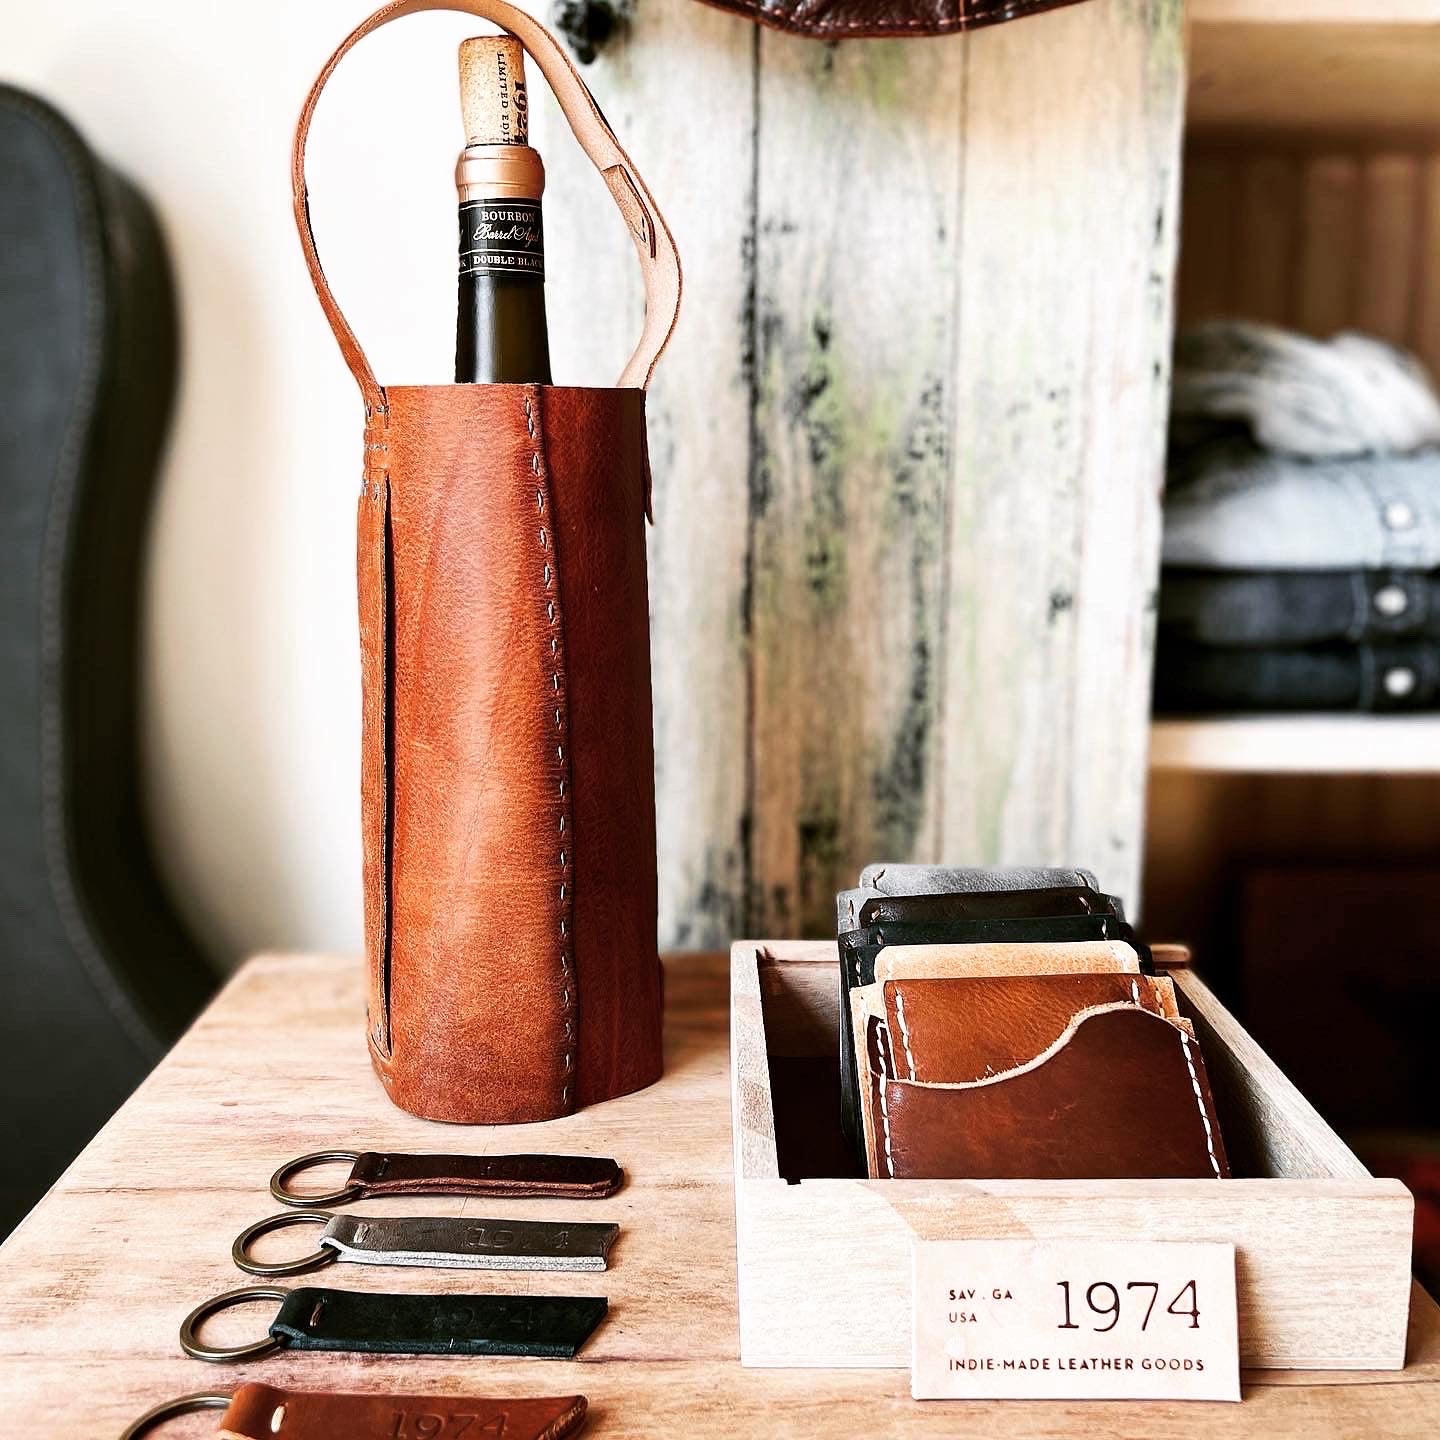 View of 1974 Leather Goods products including the Whiskey & Wine tote in Hickory, 1974 Key Fobs, and 1974 Lucas Wallets